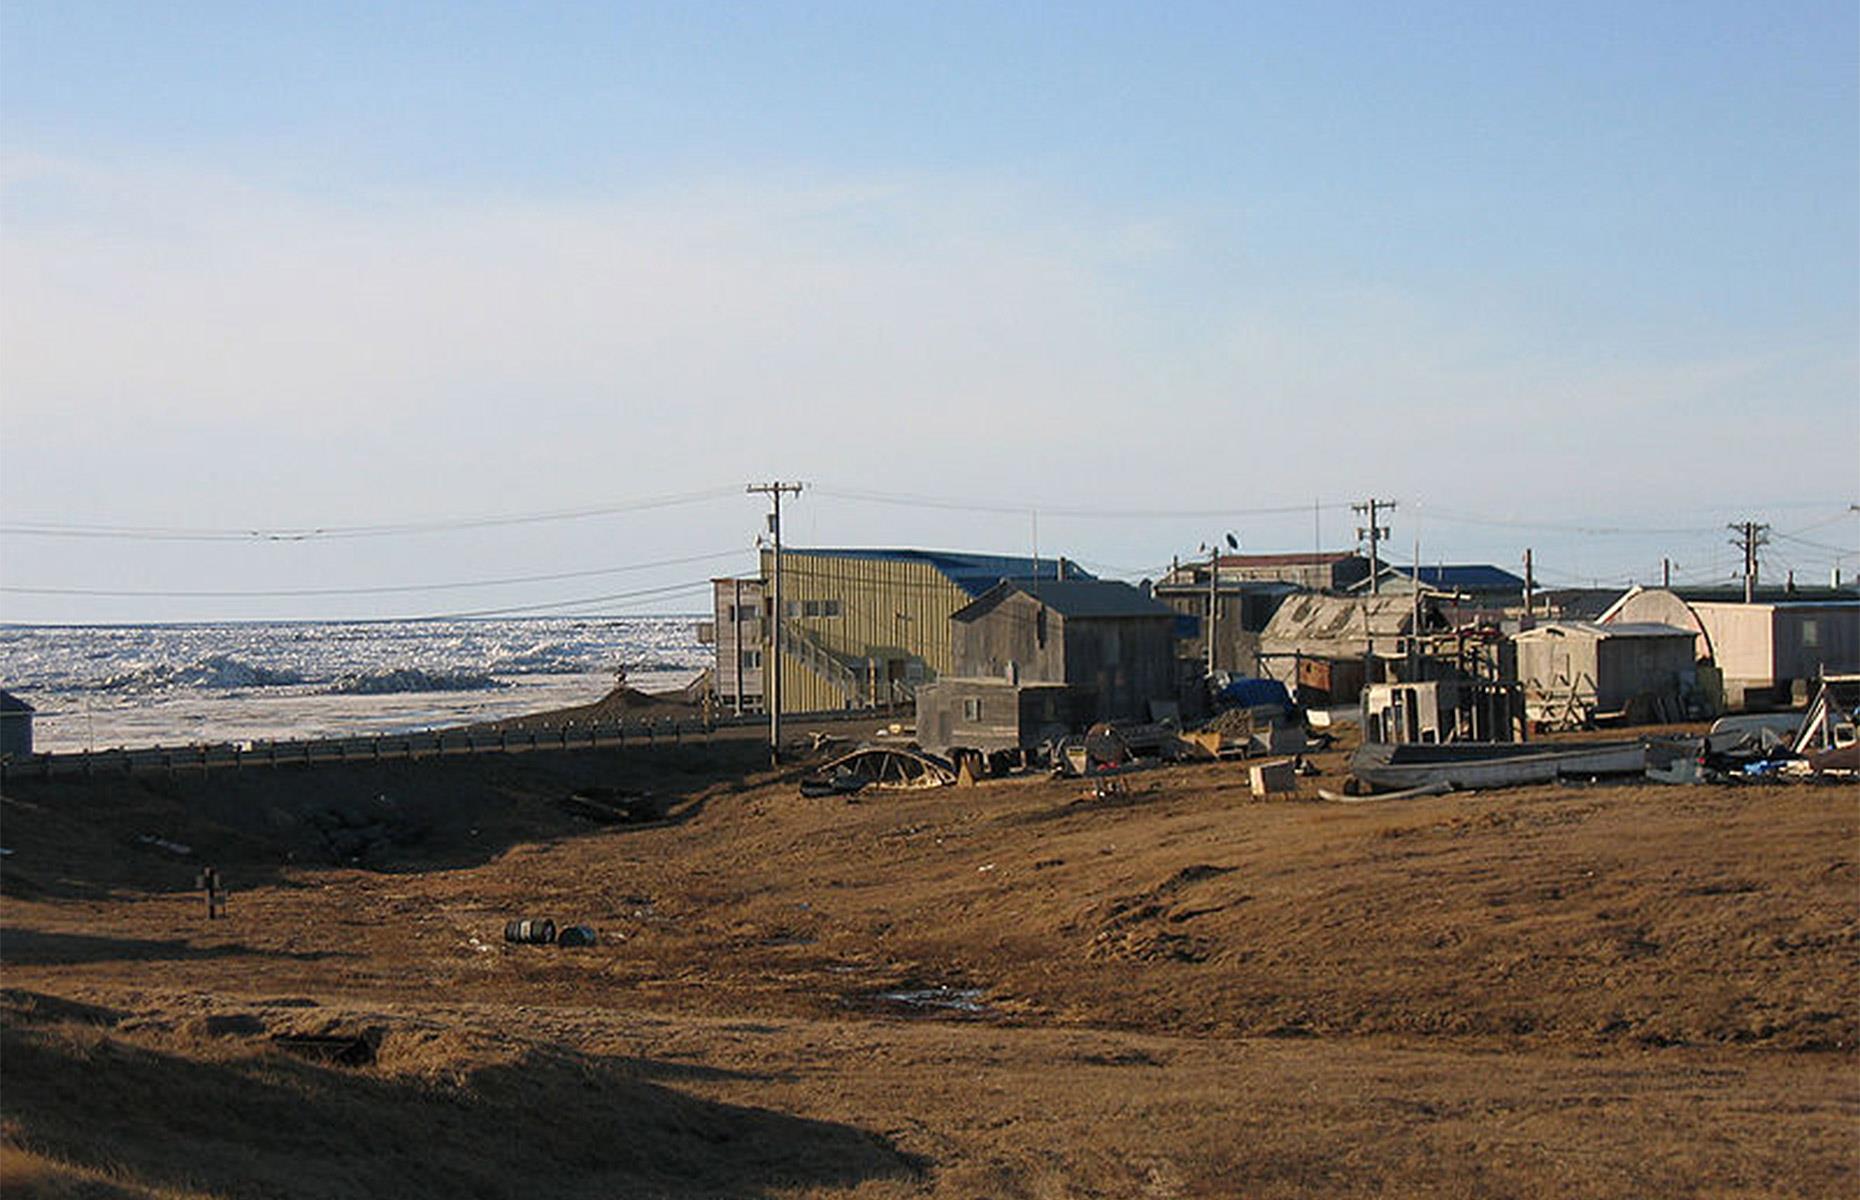 <p>Even though Utqiagvik is seen as a modern community, the locals still practice hunting, fishing and whaling to support the economy as well as for their own food. Only accessible by plane, the town has an airport which is the lifeline for any imports of vital supplies.</p>